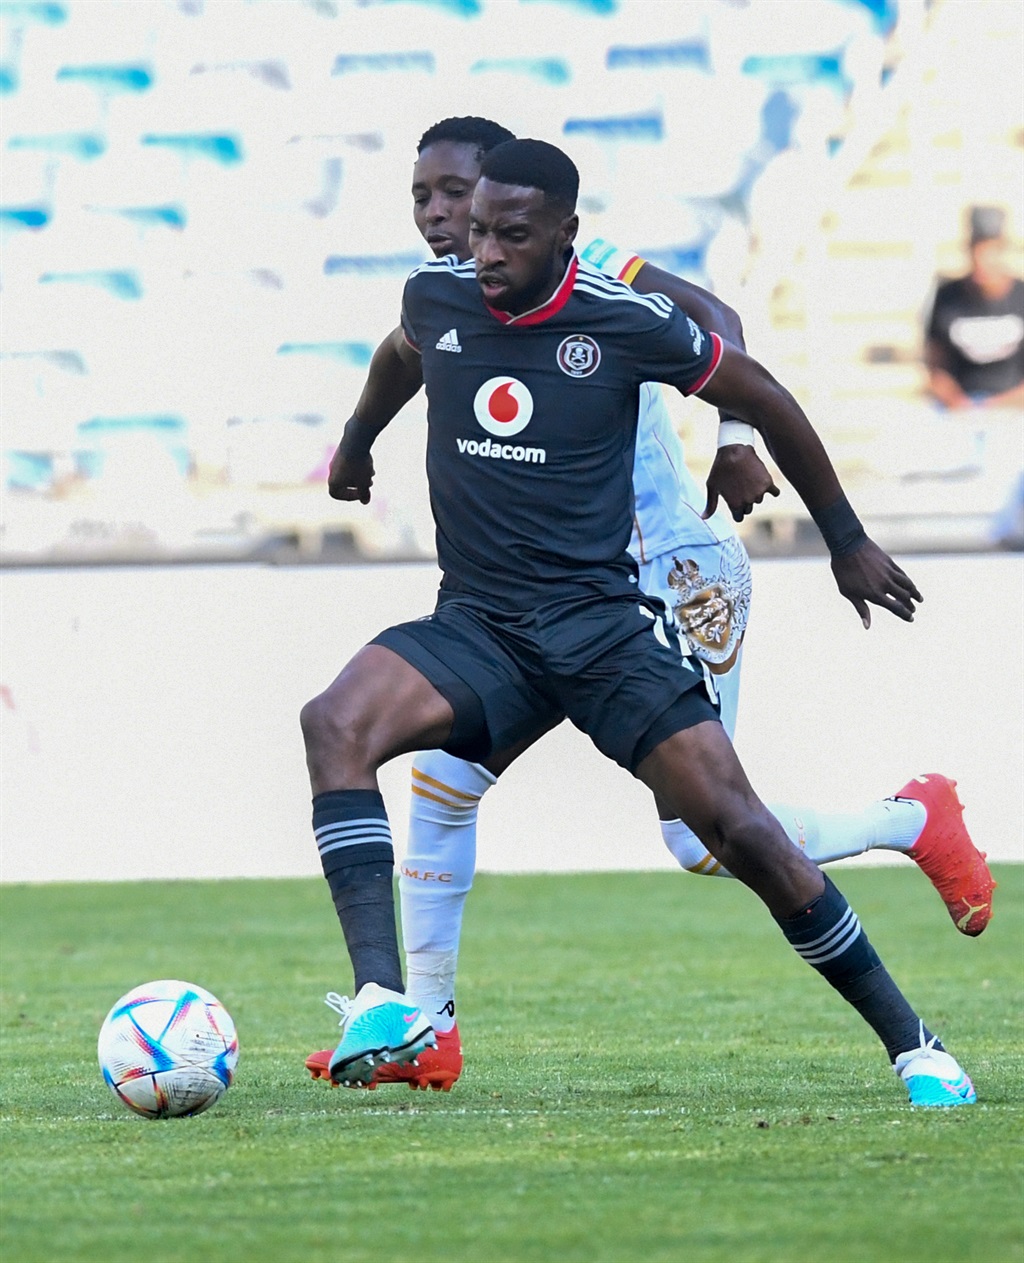 Orlando Pirates could lose two key stars - Report